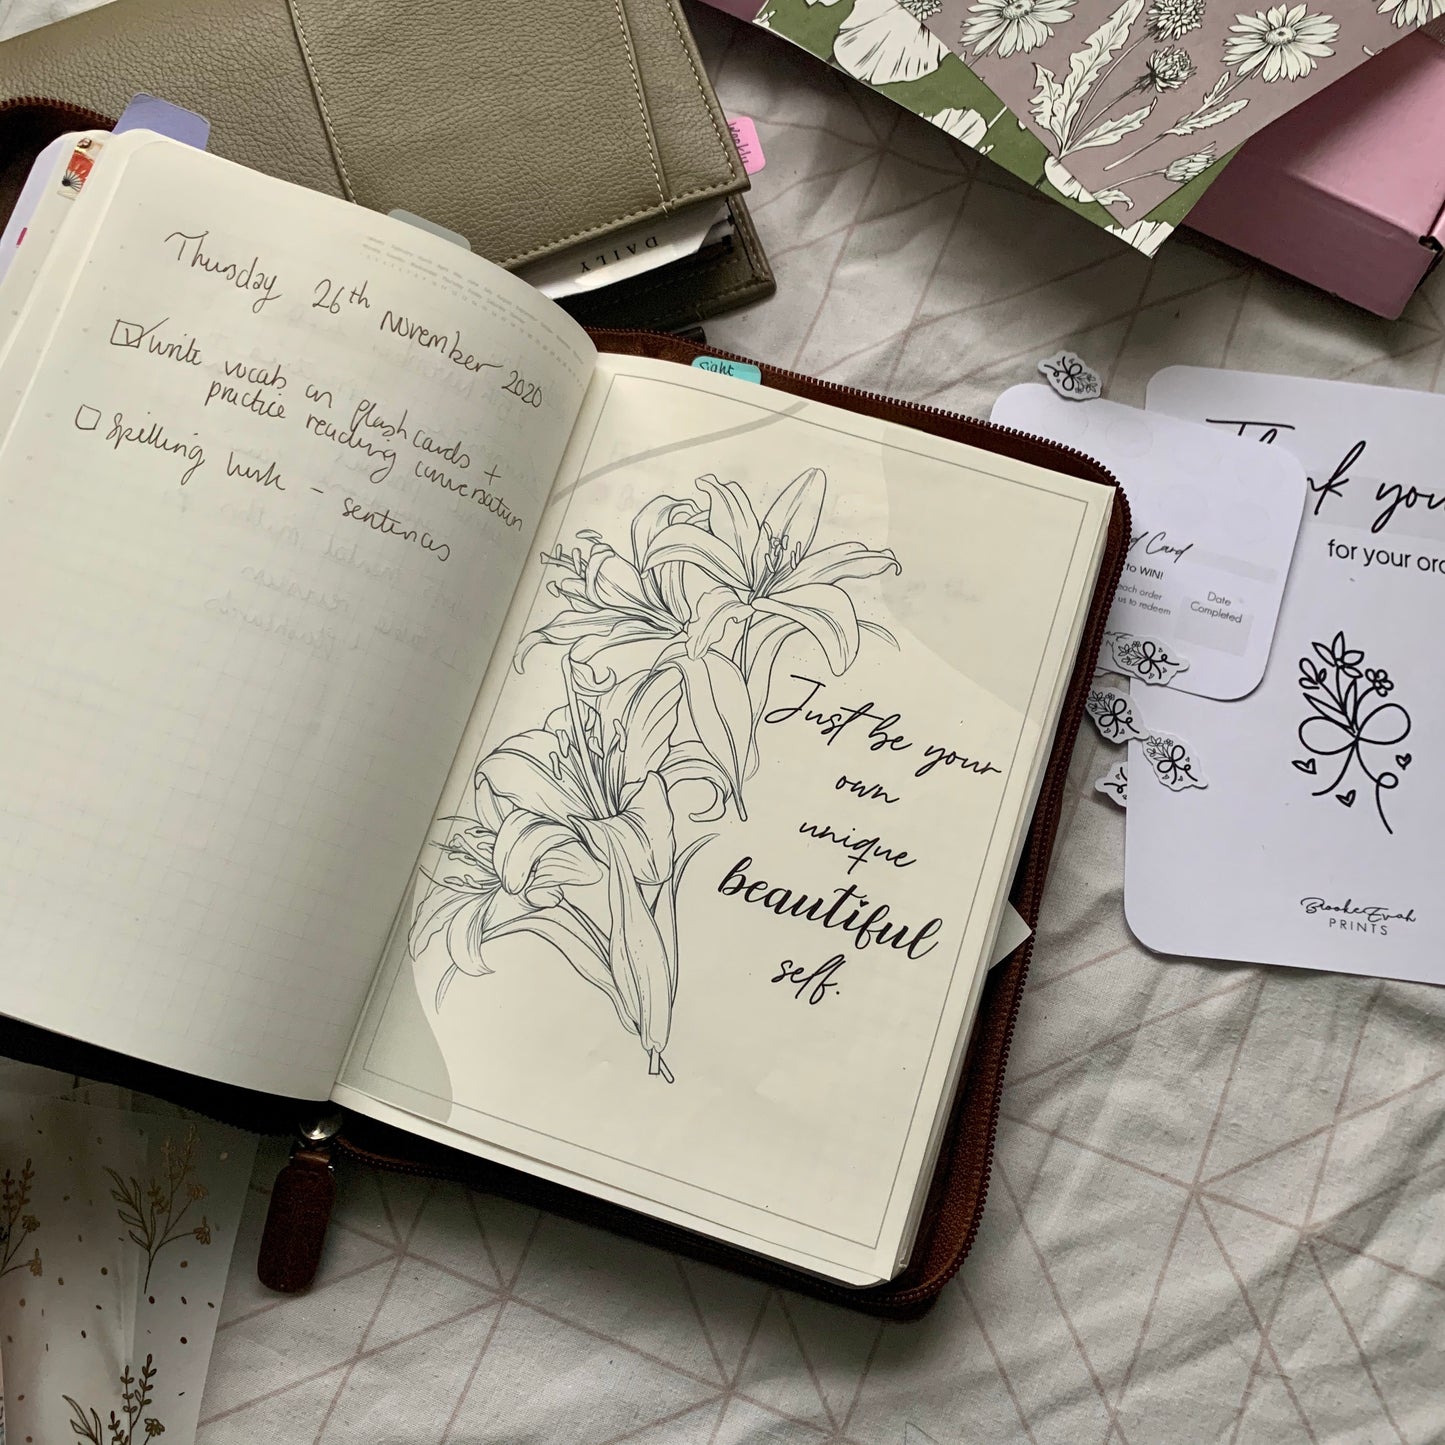 Printed Tomoe River Paper Planner Dashboards - Just be your own unique beautiful self